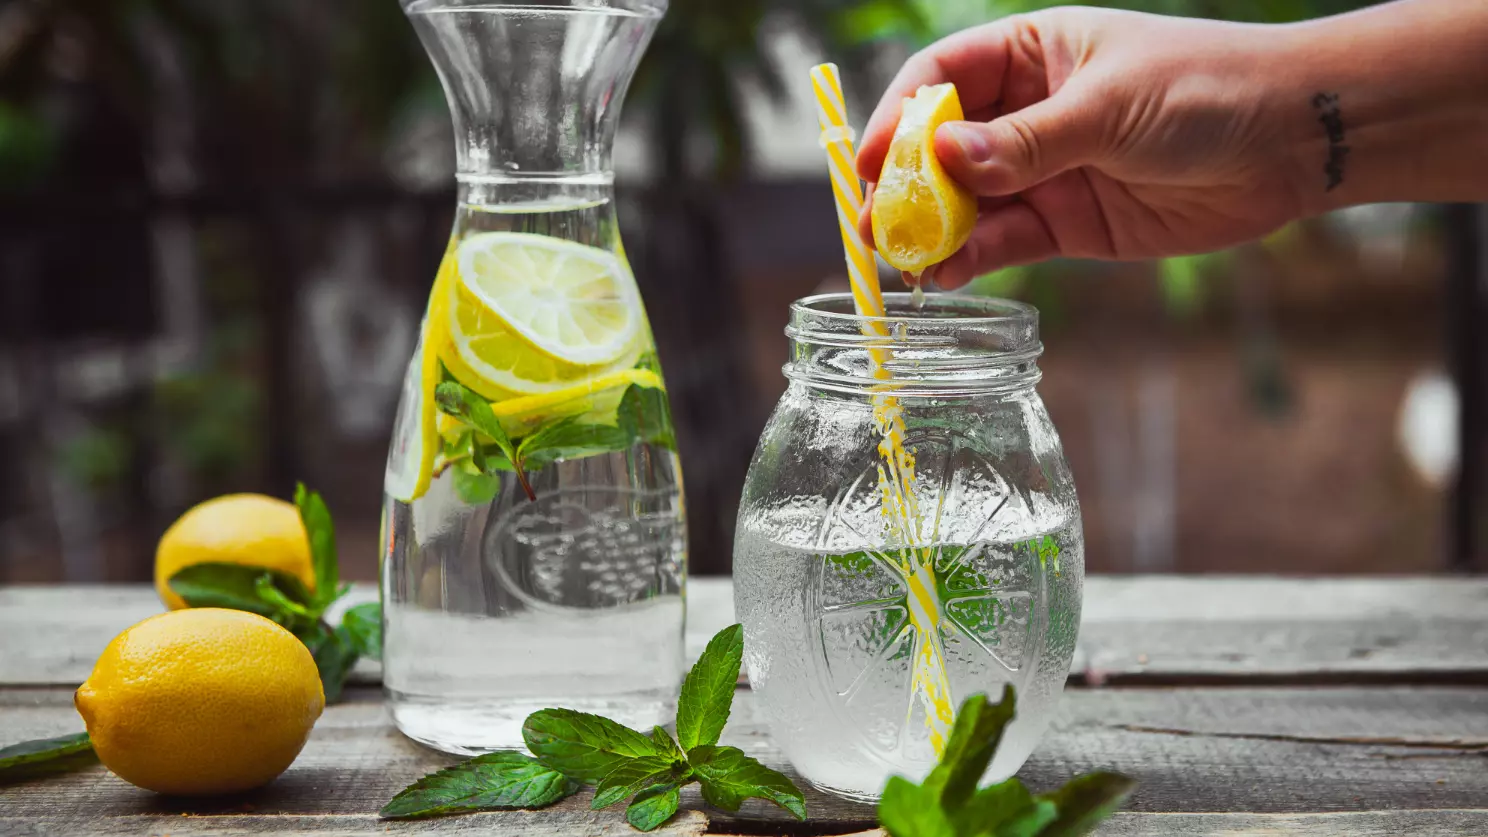 The number of calories in water with lemon